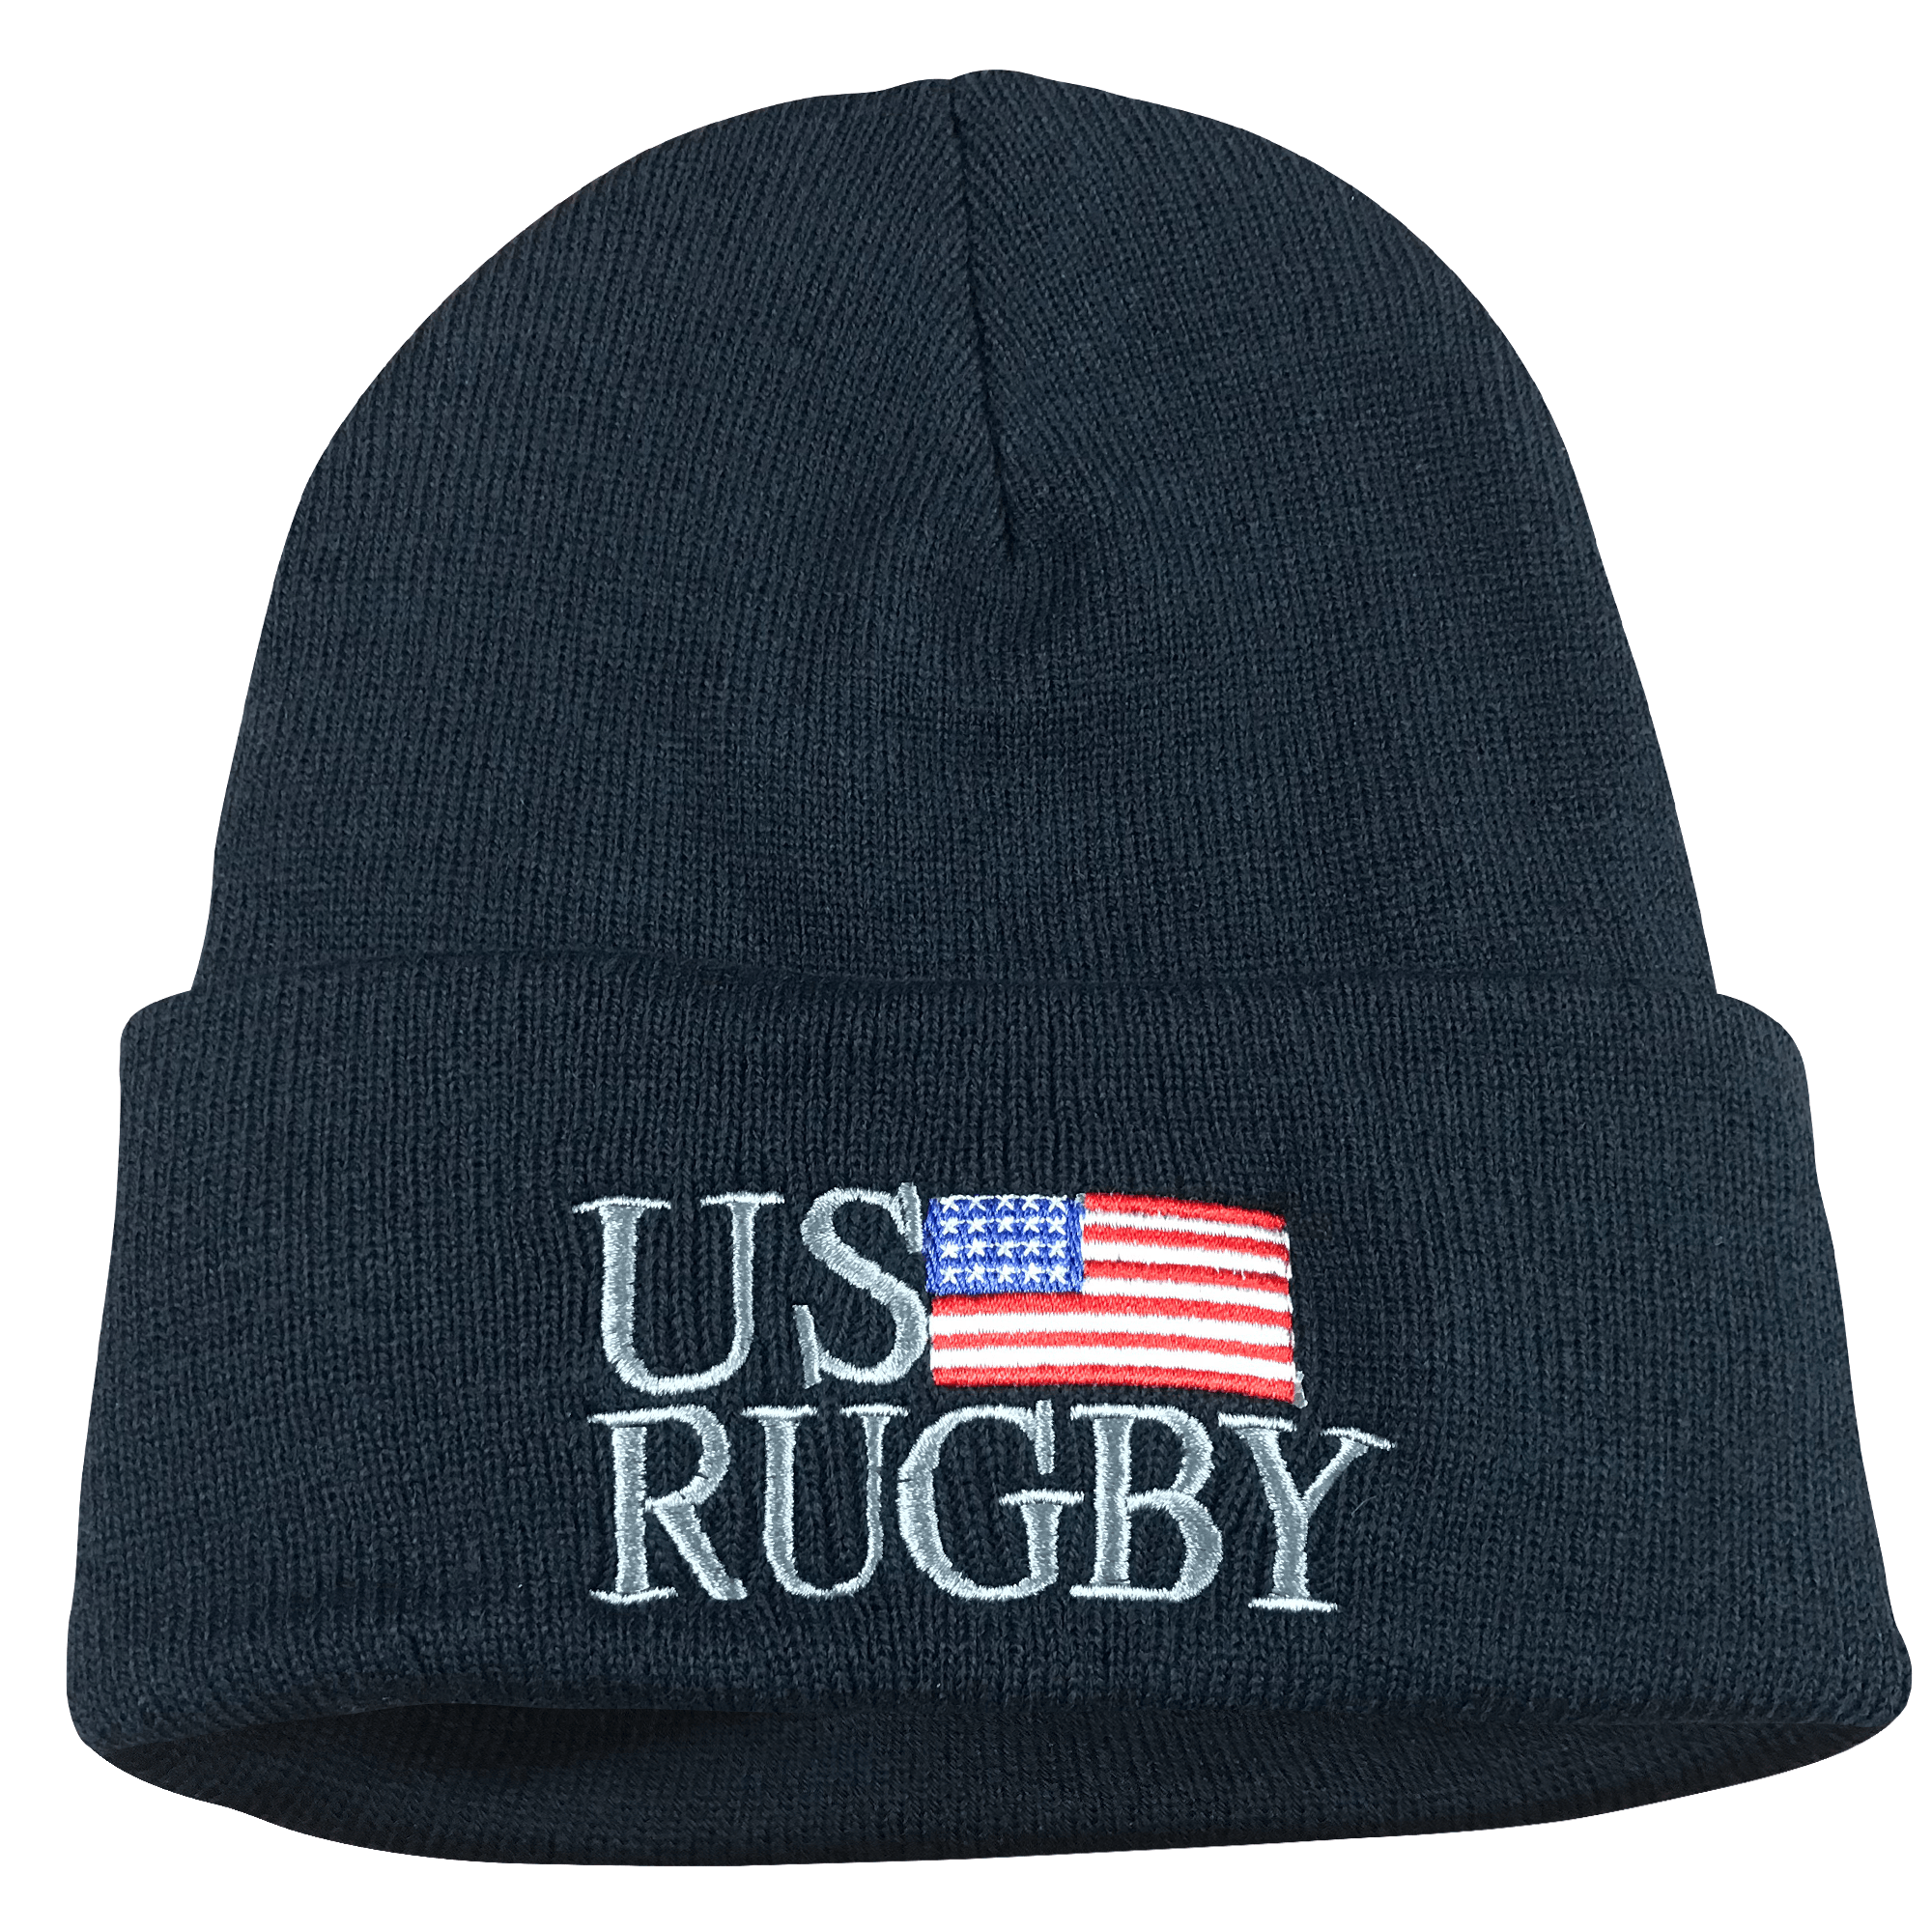 Rugby Imports US Rugby Flag Knit Cap